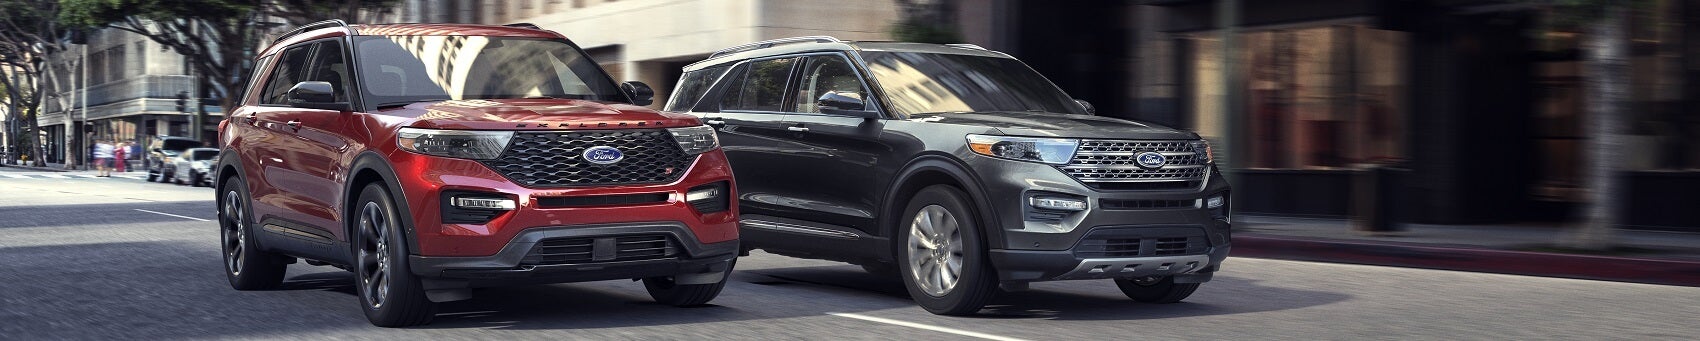 2020 Ford Explorers